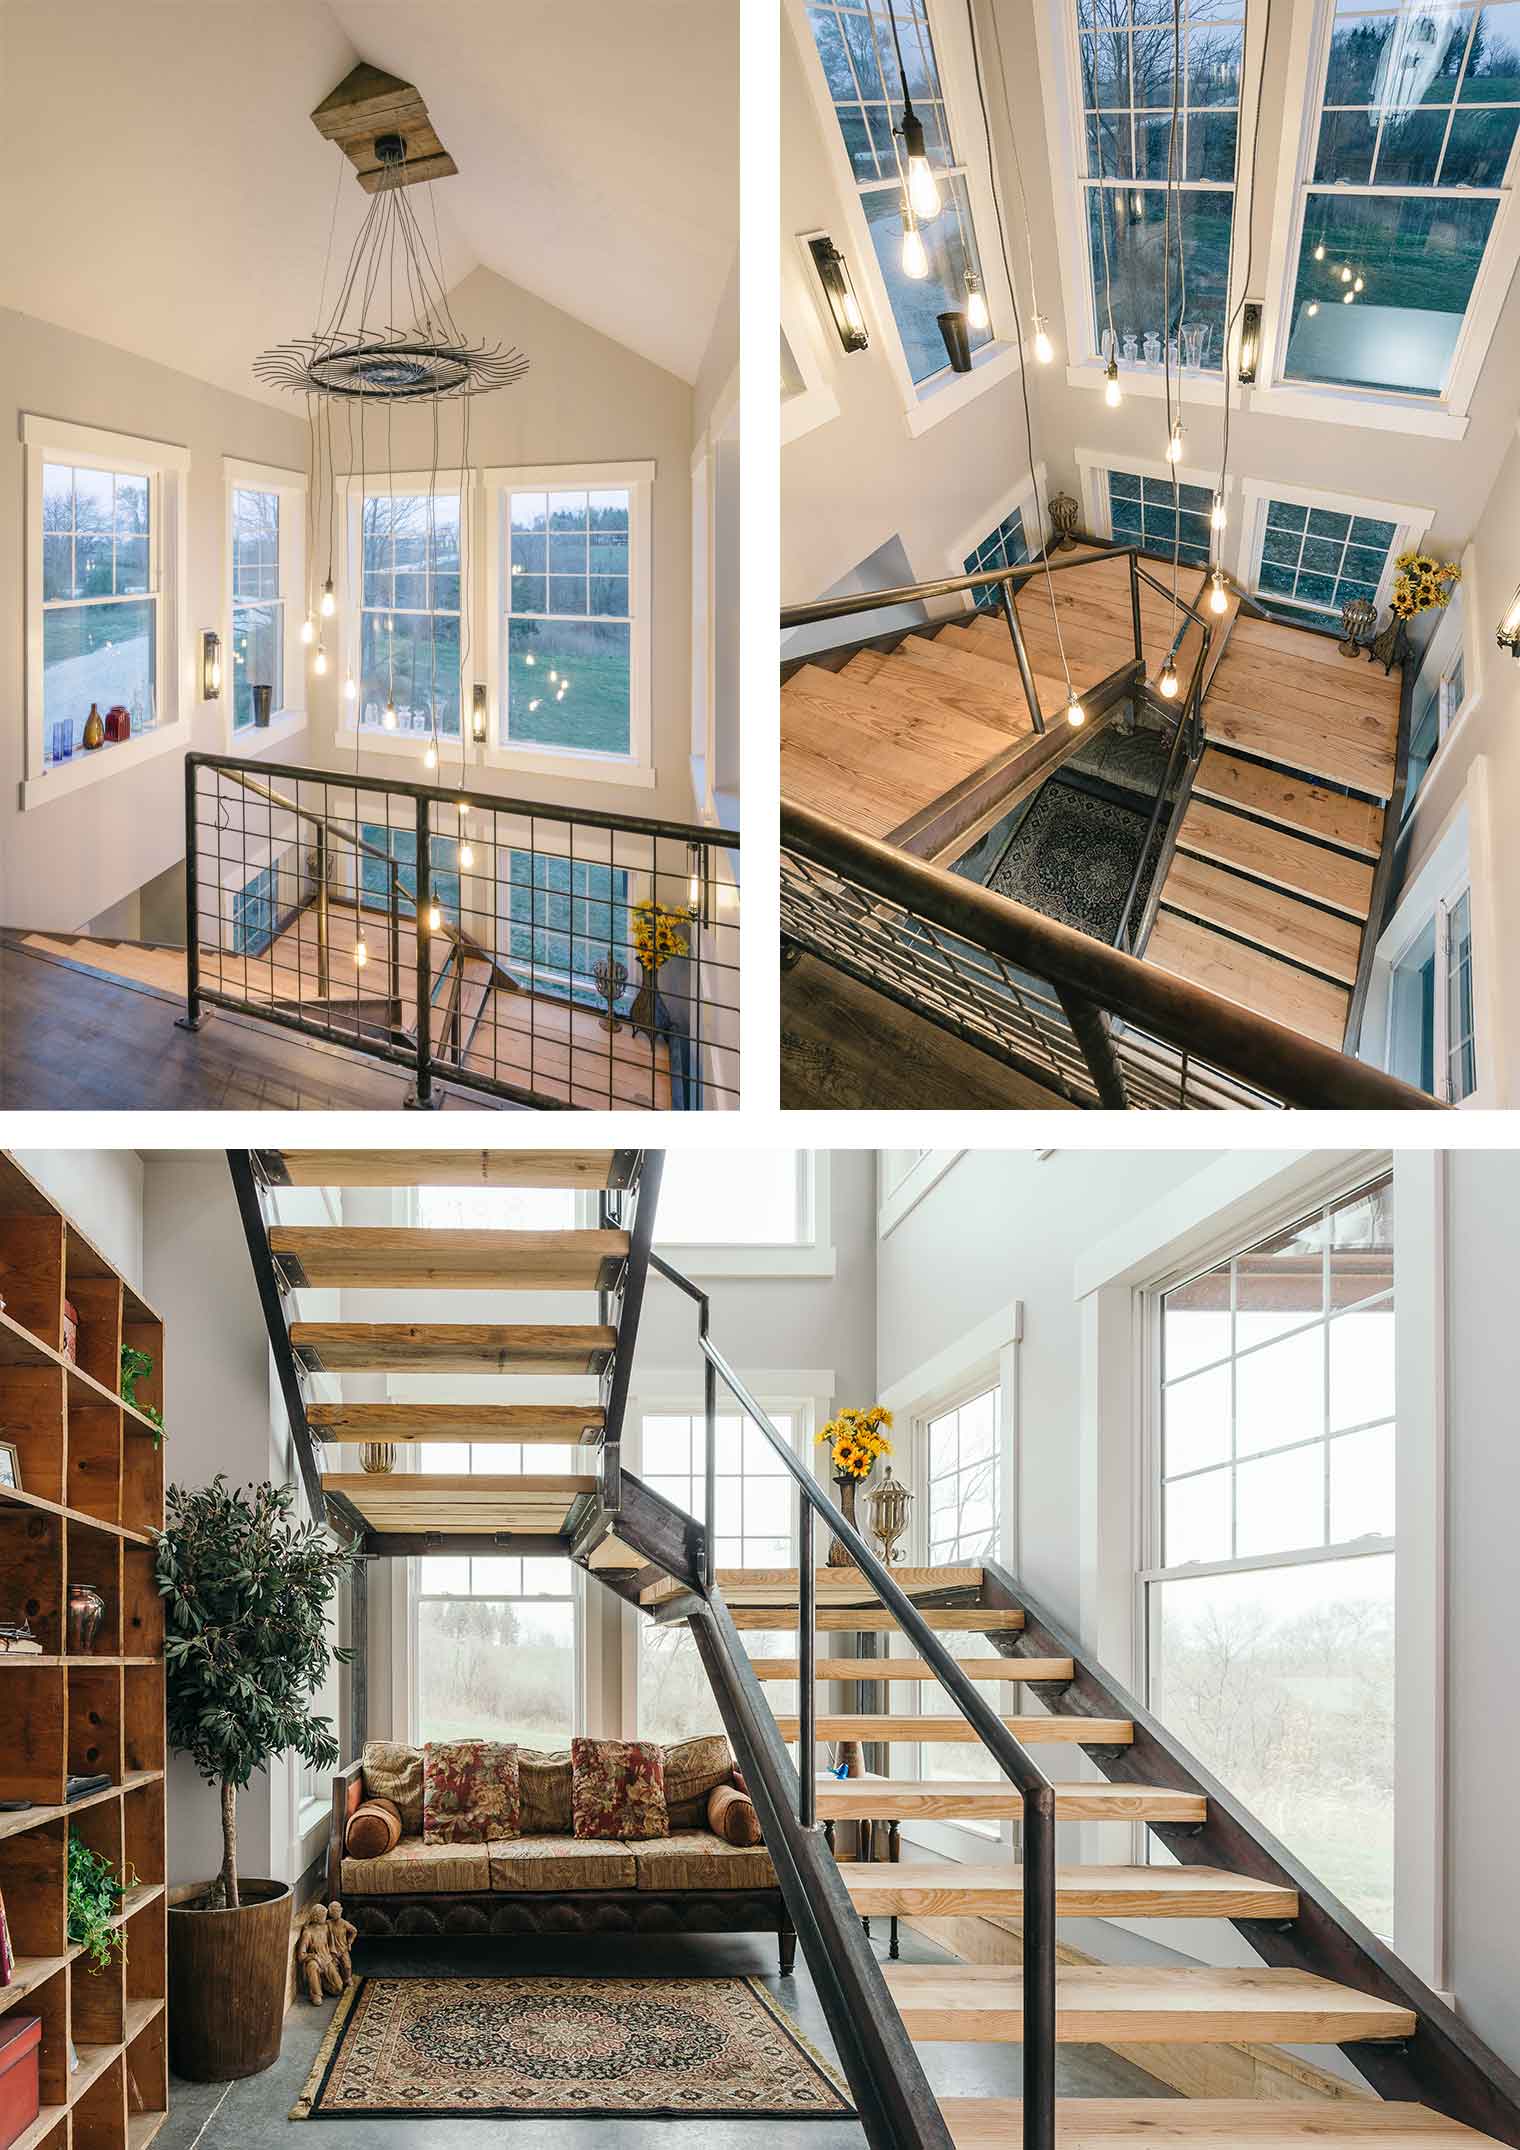 Floating steel and bridge plank lumber stairs in barn style custom new home in St. Charles, Iowa designed and built by Silent Rivers of Des Moines features a wagon wheel light fixture